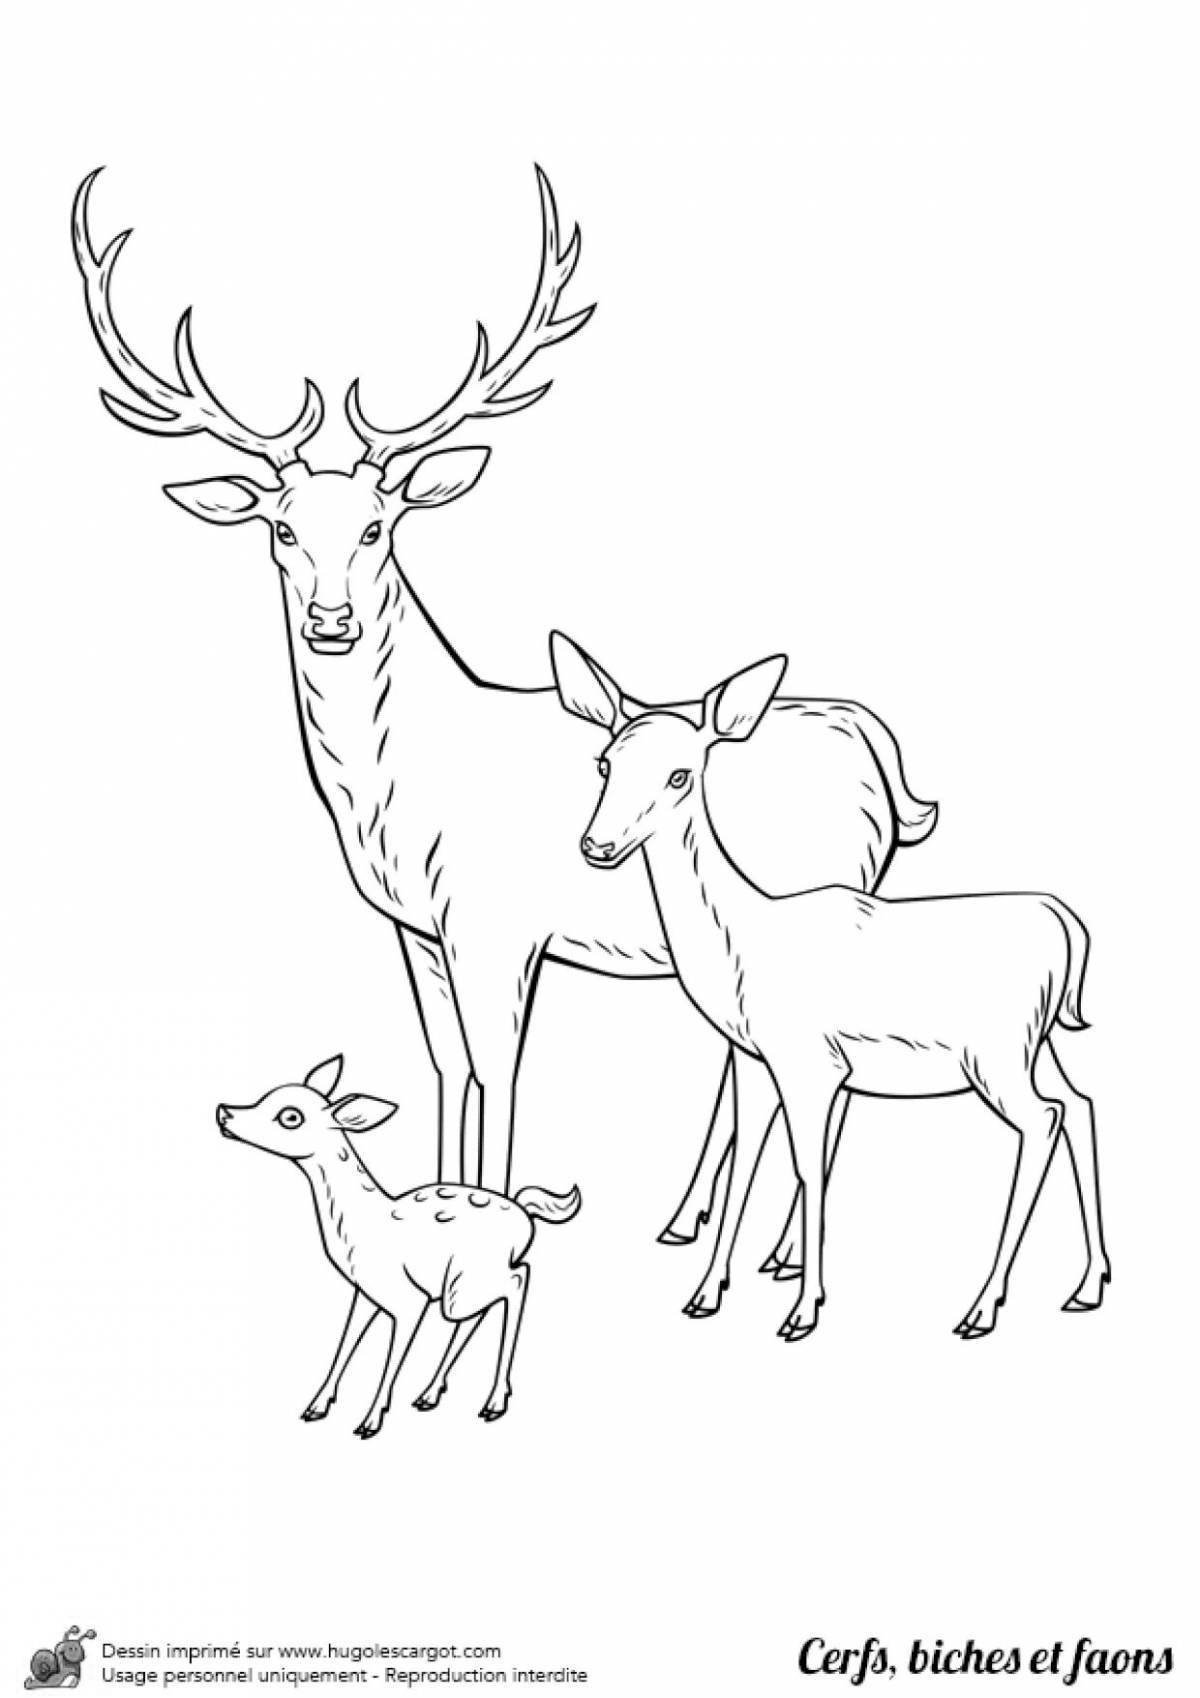 A fascinating drawing of a deer